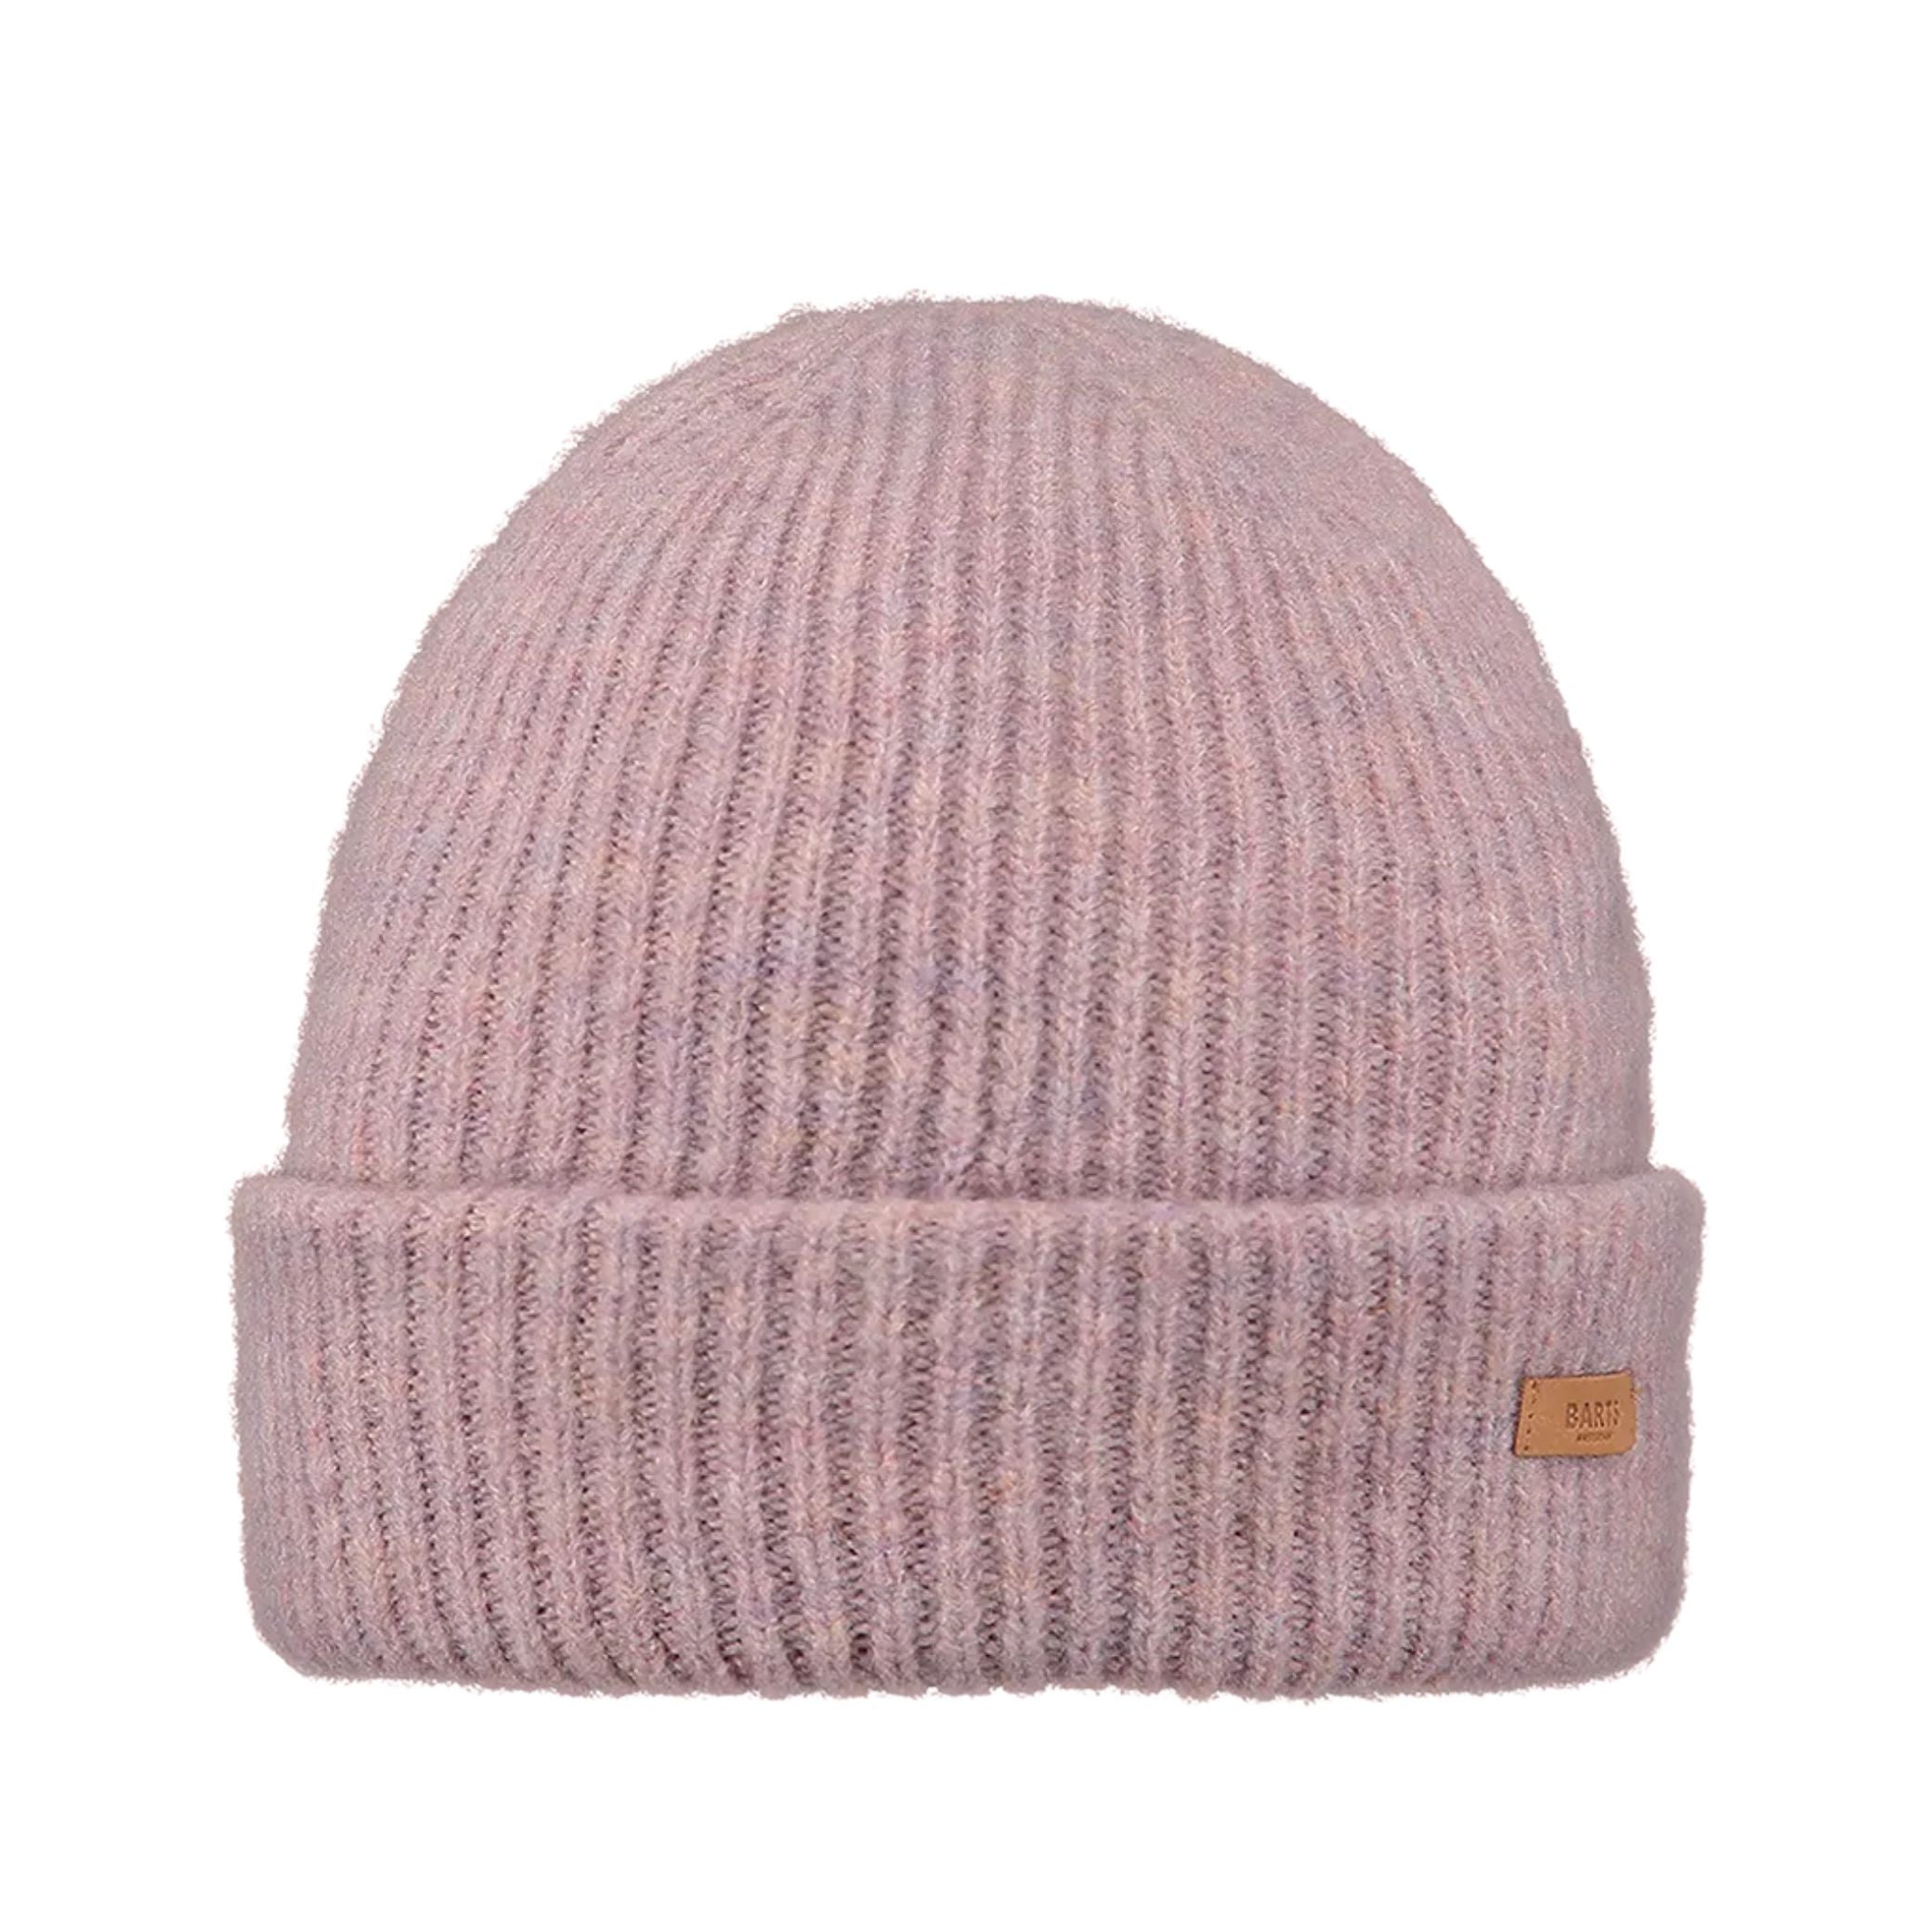 BARTS® Witzia Beanie | Barts | Portwest - The Outdoor Shop